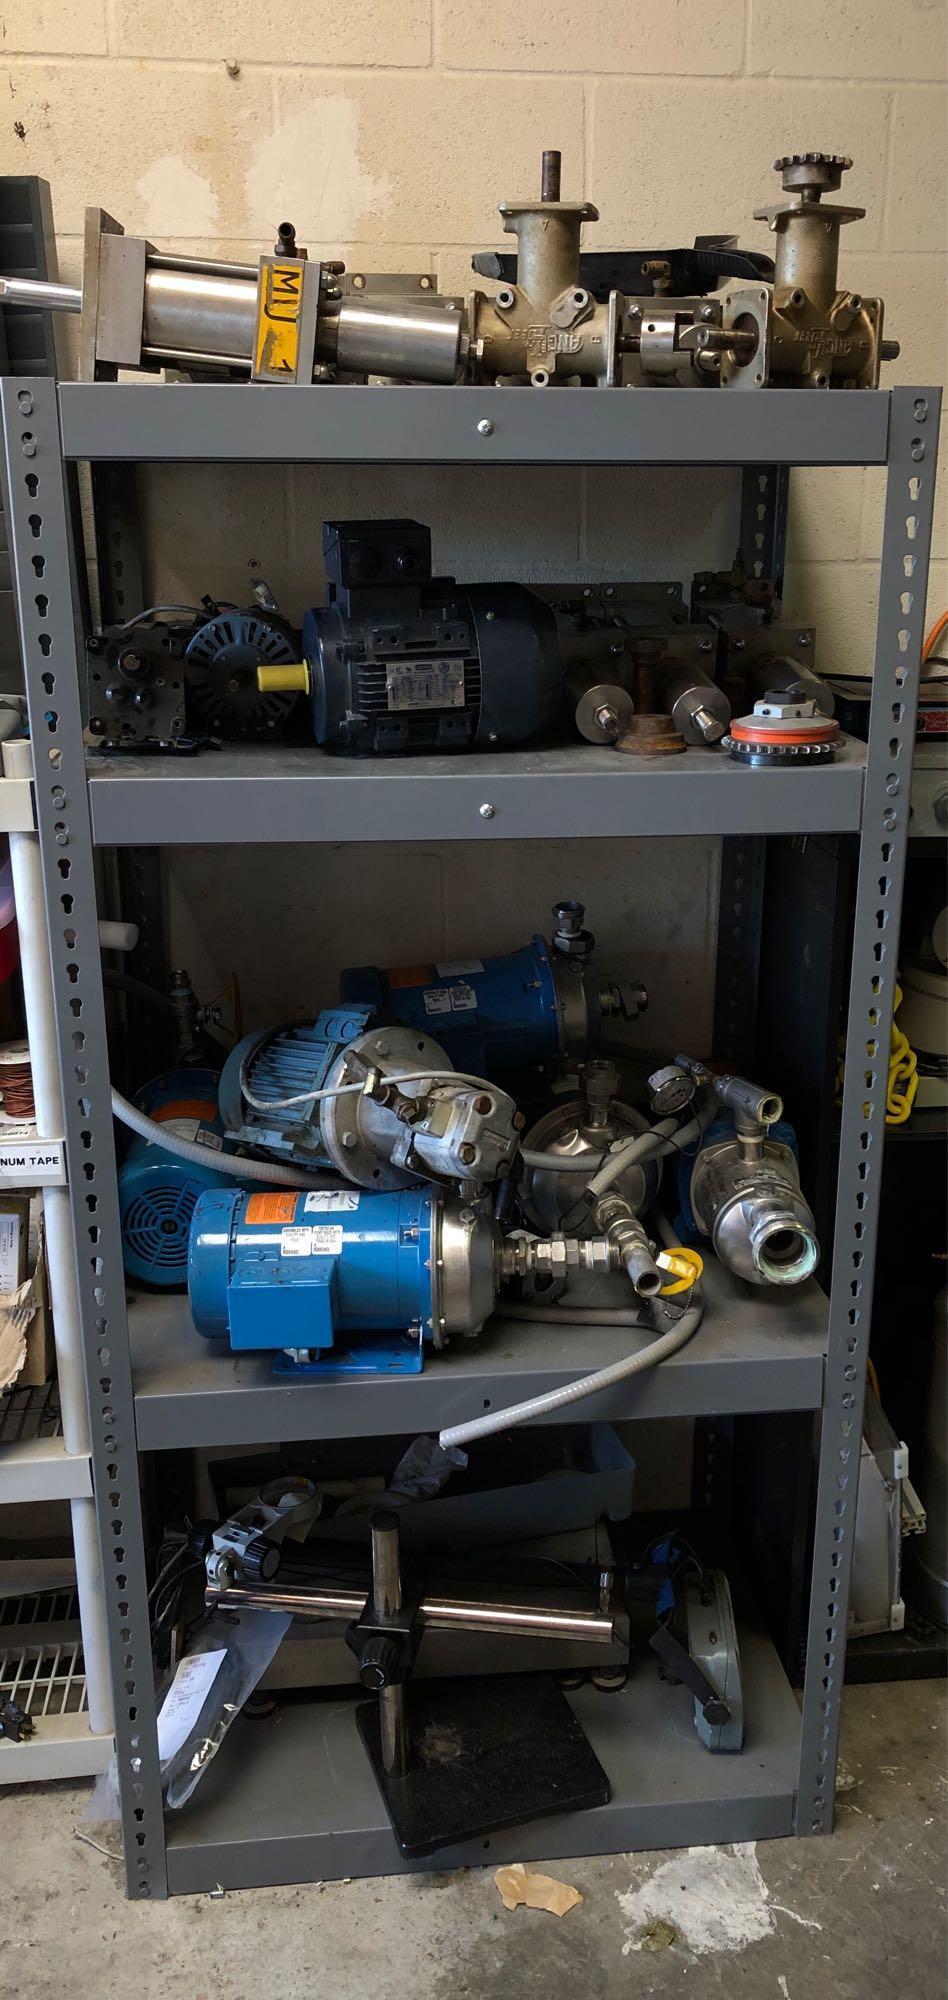 Shelving with Electric Motors, Filter Pumps, Angle Gears